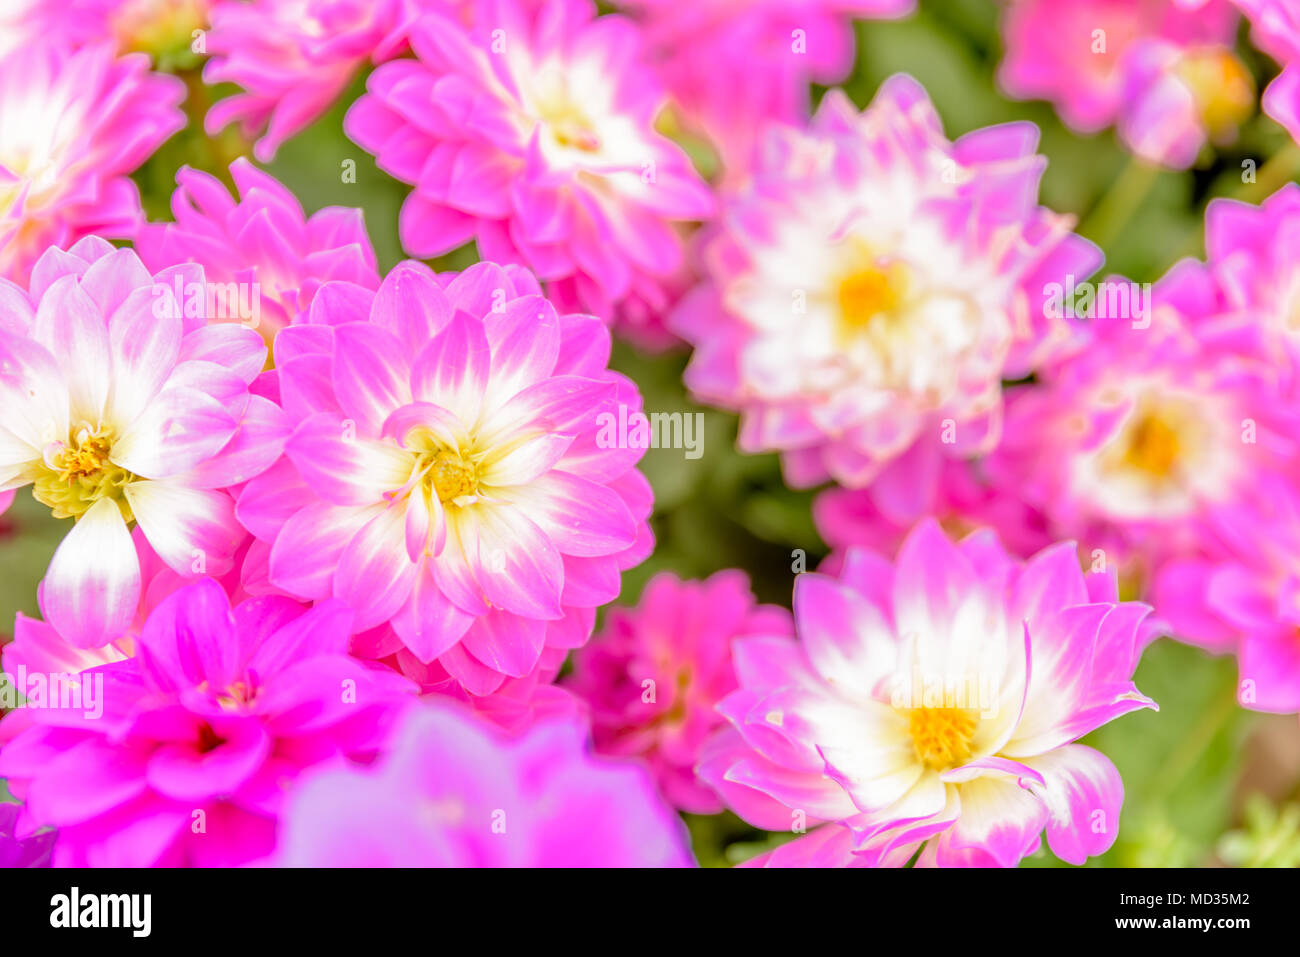 Top view of pink and violet flowers in natural garden for sale in pots Stock Photo